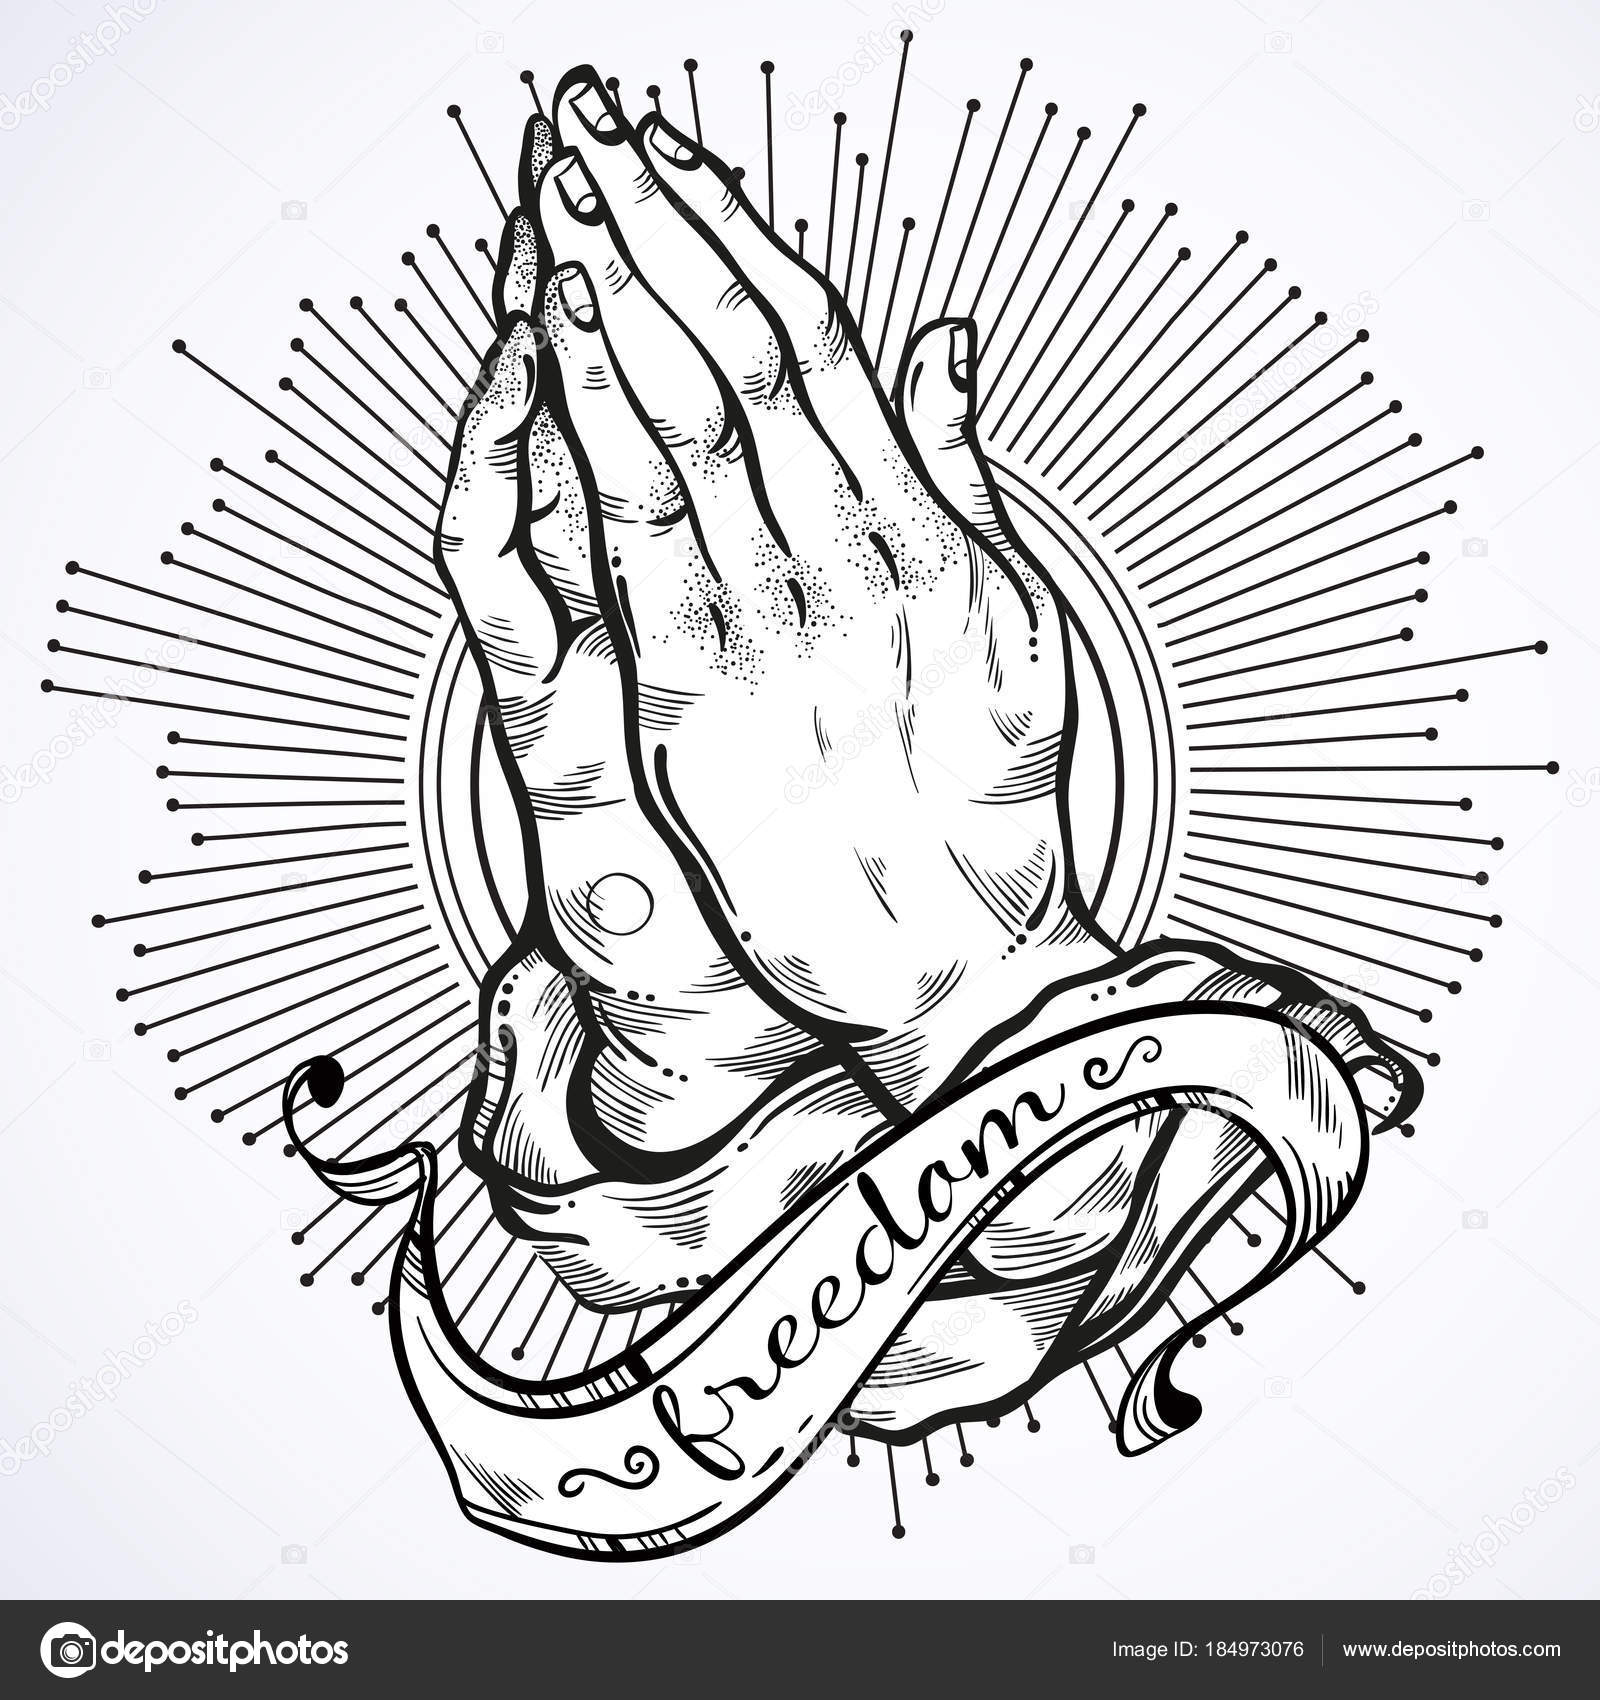 Beautifully detailed human hands folded in prayer. Appeal to the